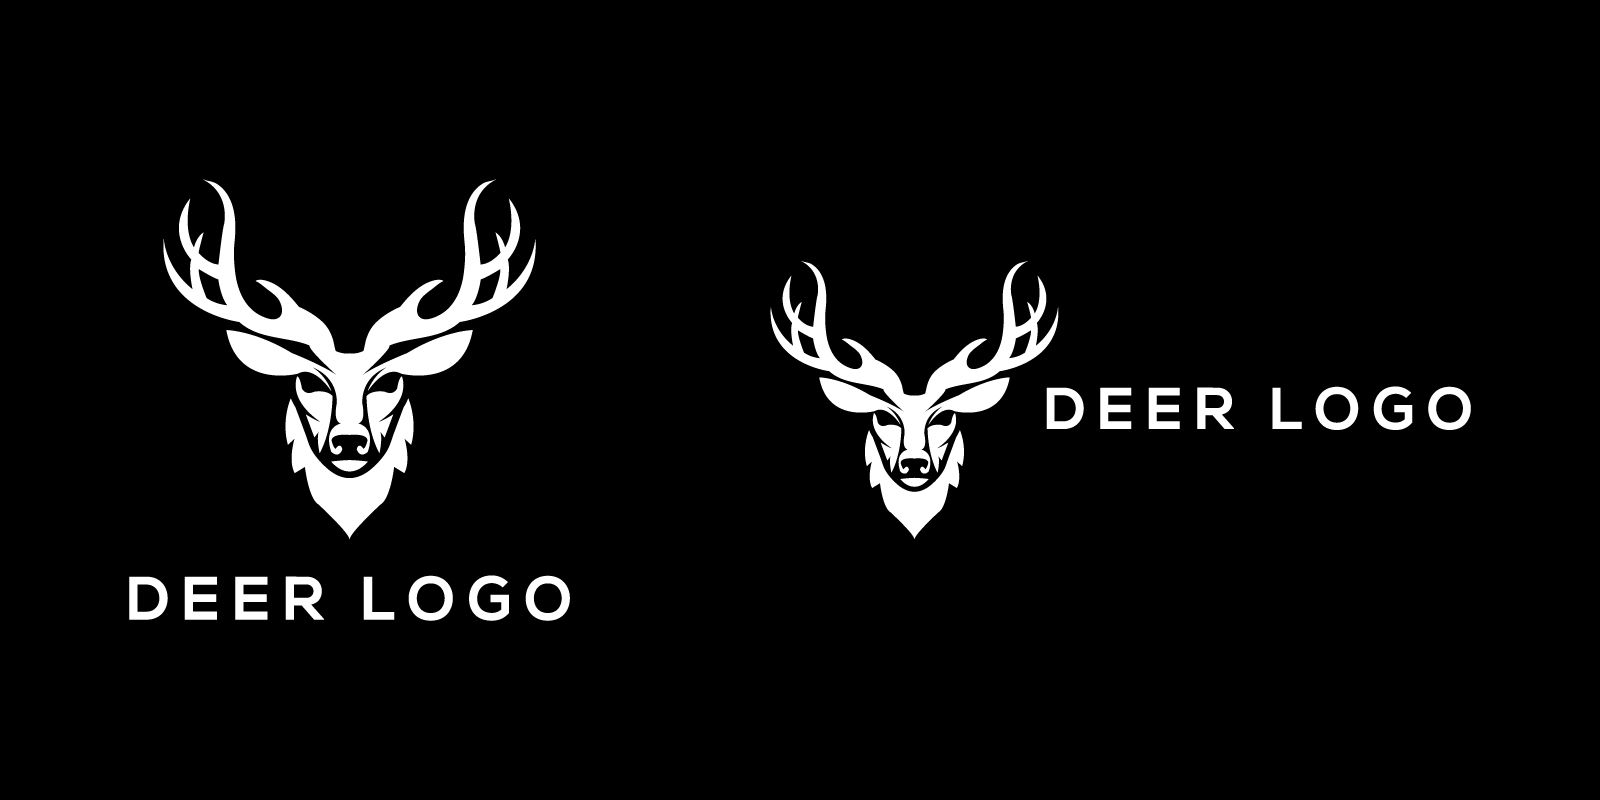 Deer Sports and E-Sports Logo vector free download